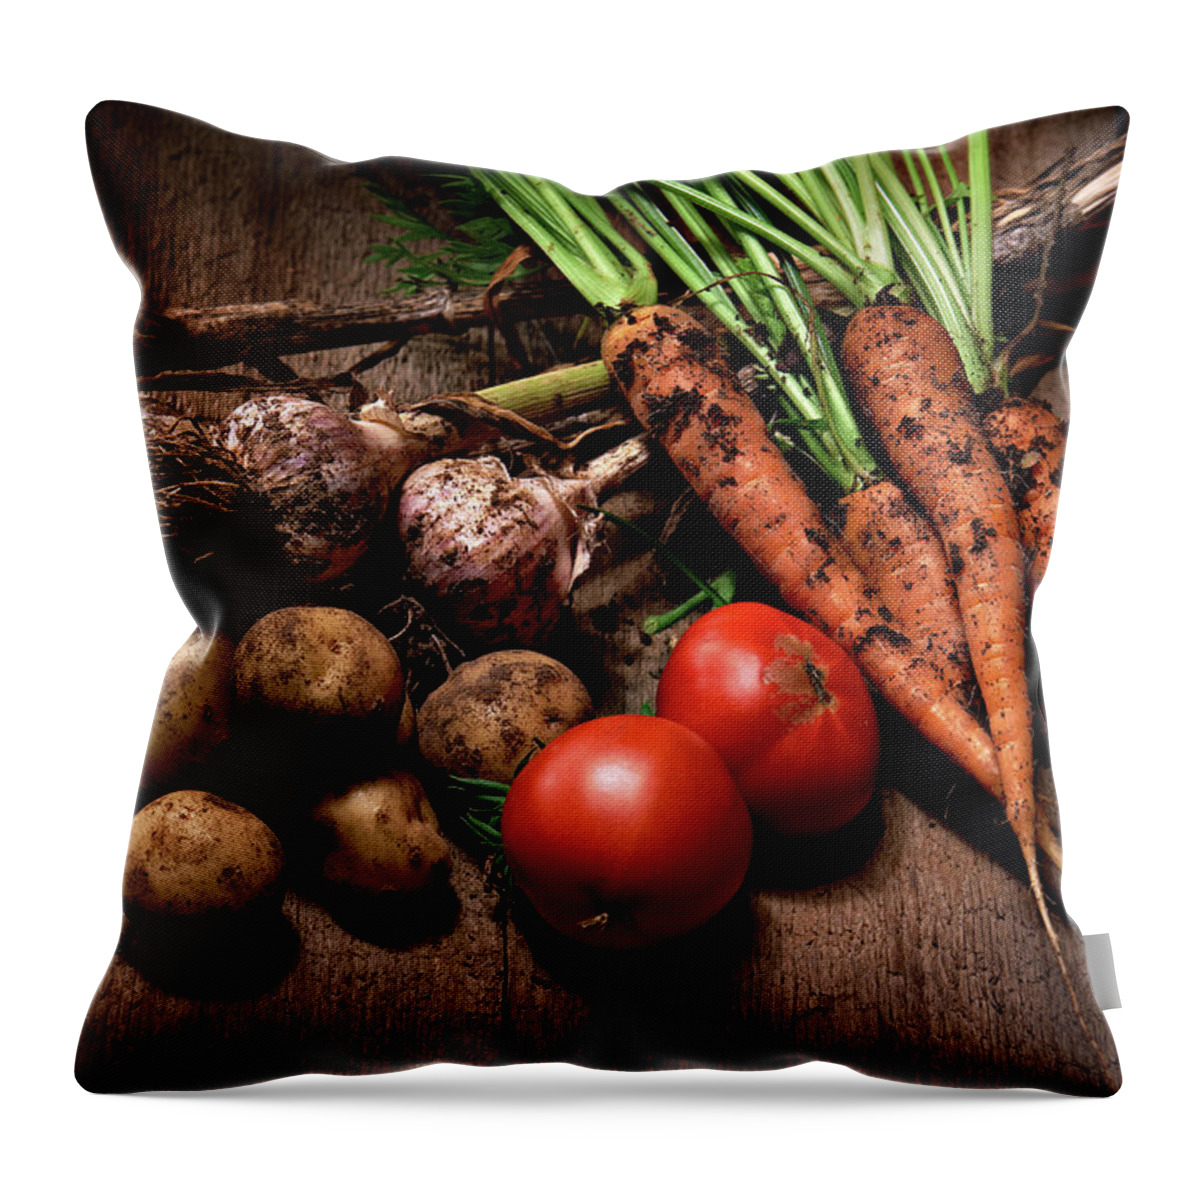 Outdoors Throw Pillow featuring the photograph Vegetables On Wood by Kaupok